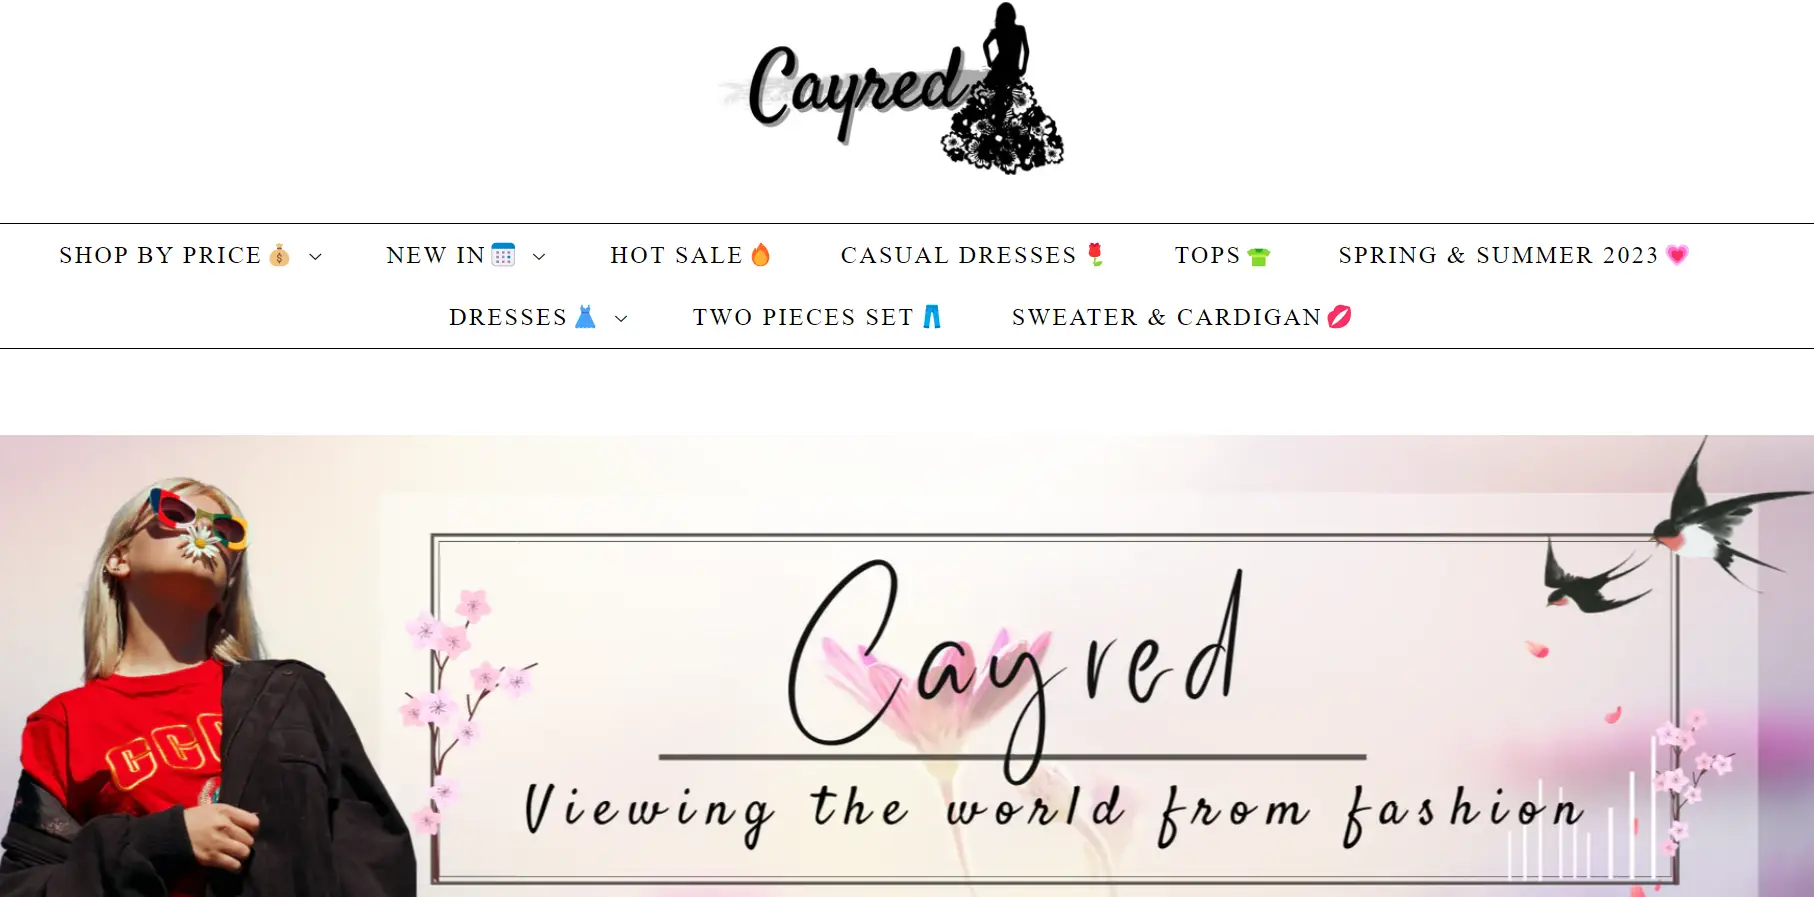 You are currently viewing Cayred Reviews – Is Cayred Clothing Legit & Worth Your Money?